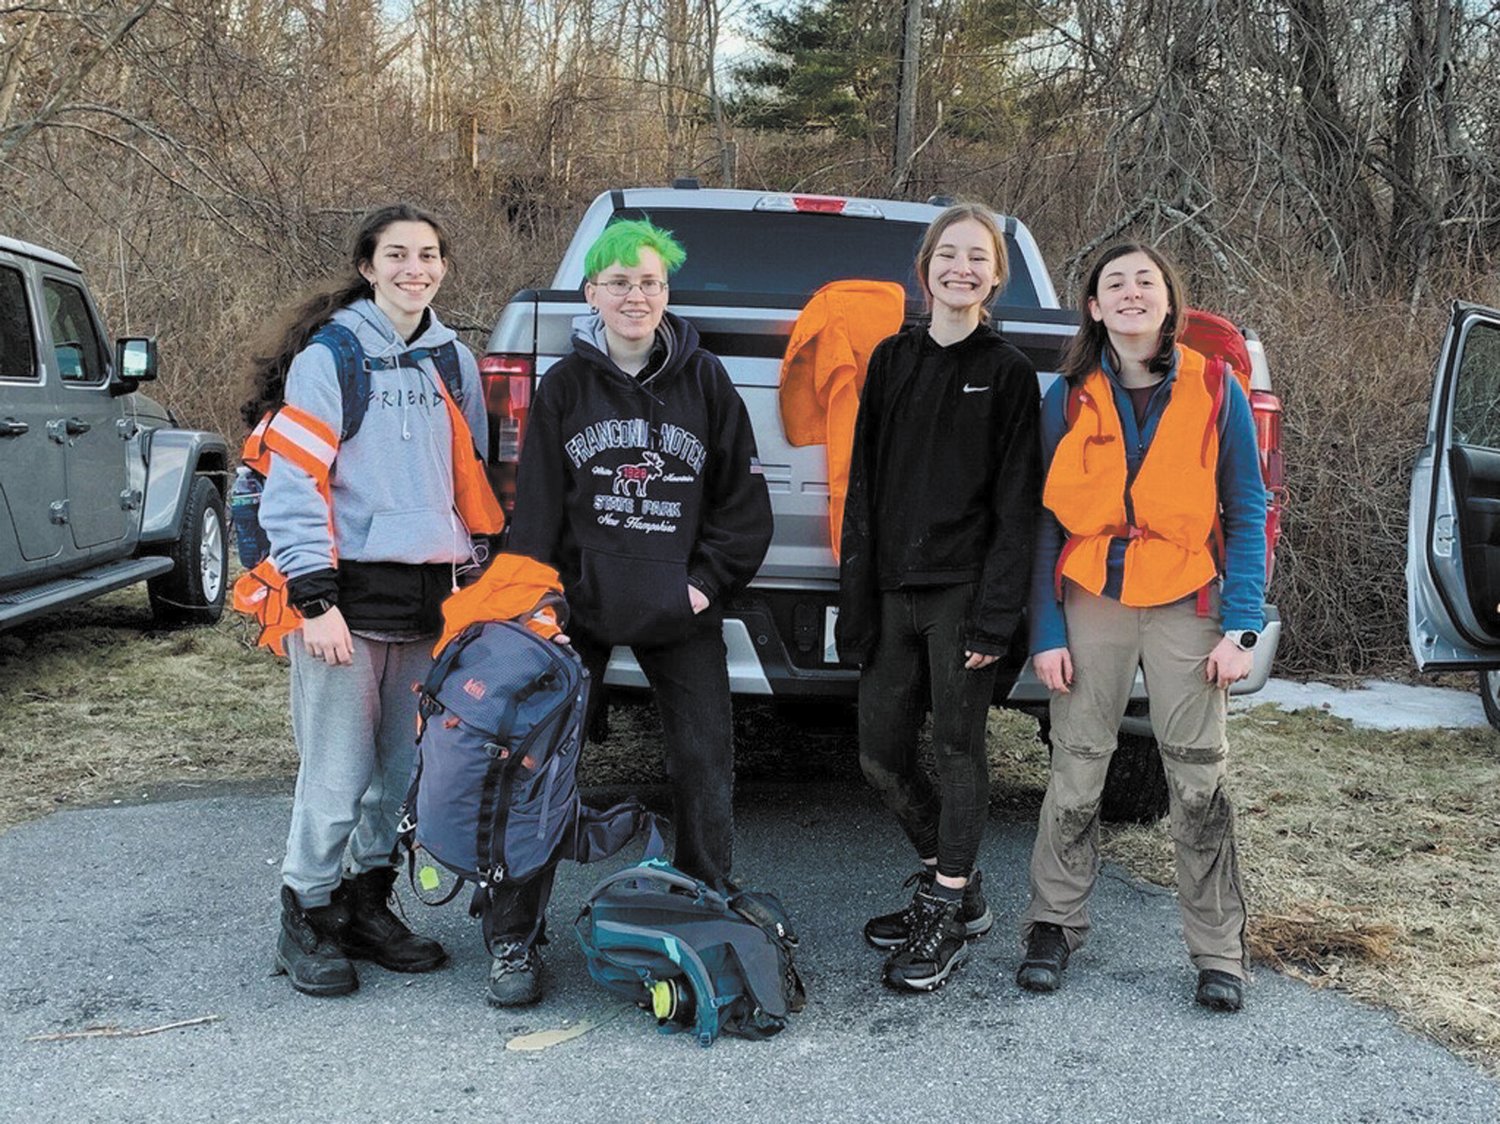 Emma Capirchio pictured with other members of her Troop after a 20 mile hike.